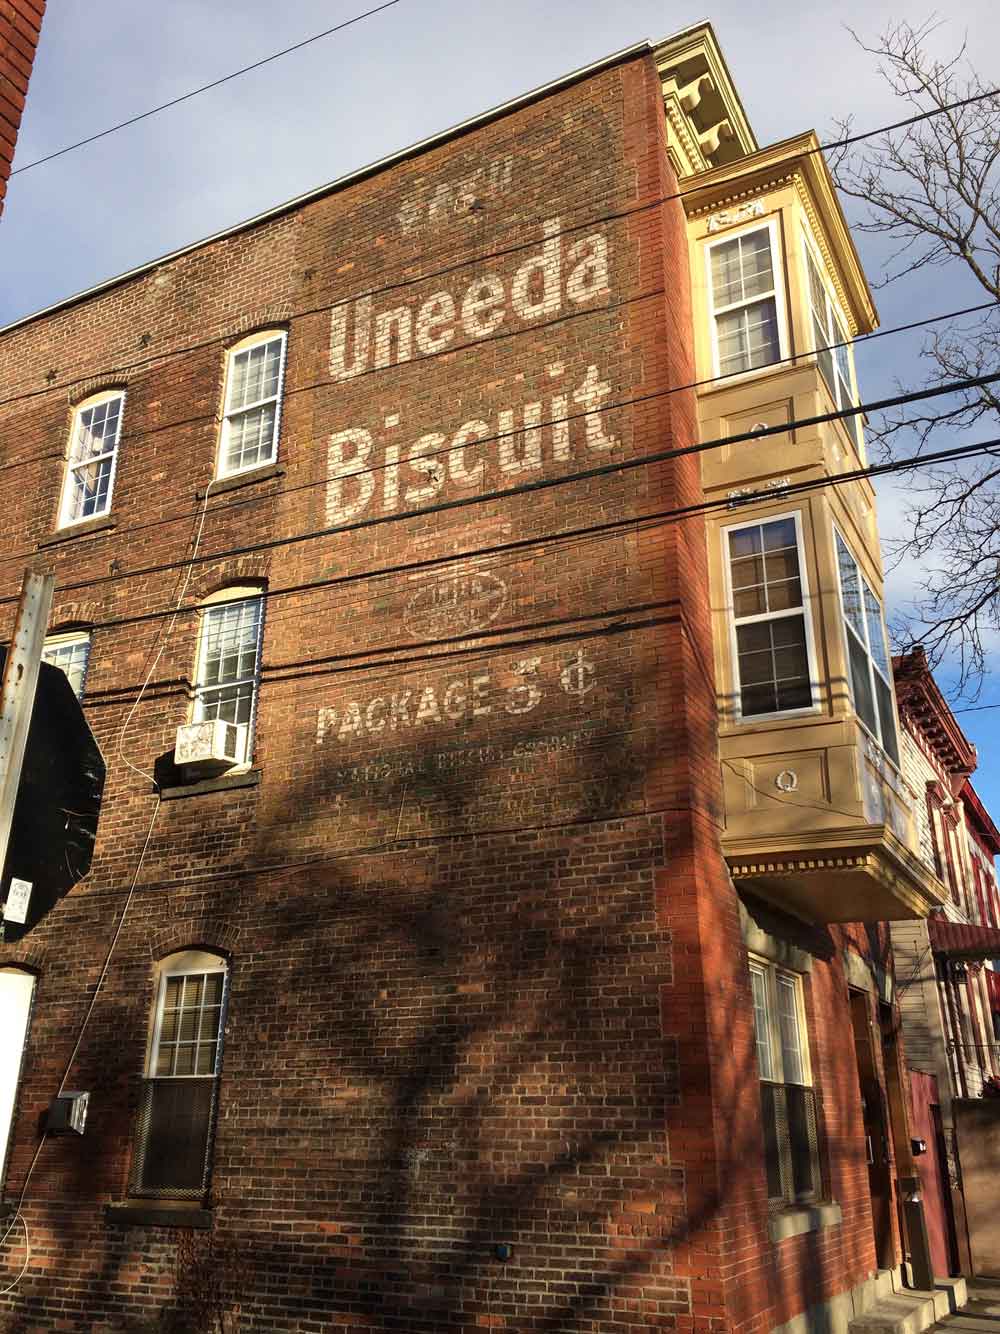 Uneeda Biscuit ghost, Troy, New York